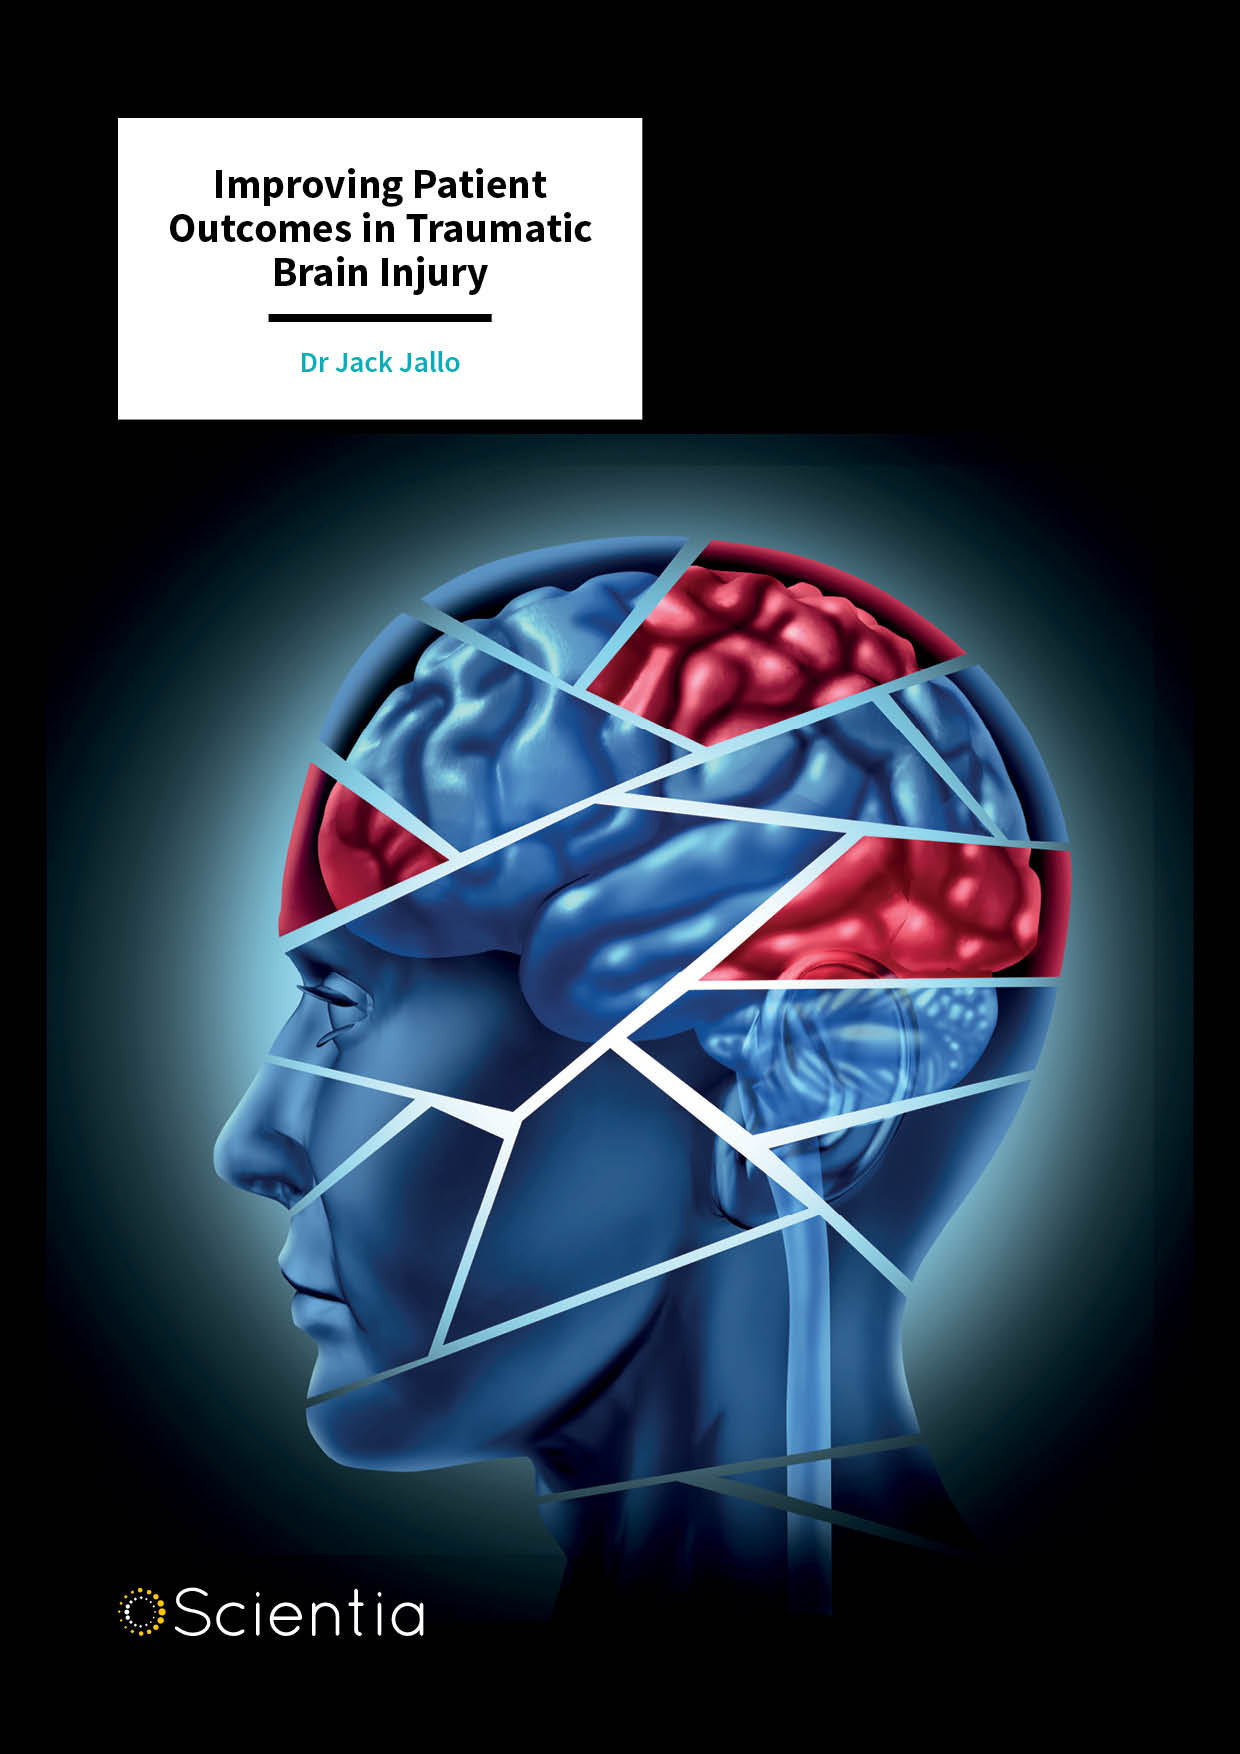 Dr Jack Jallo – Improving Patient Outcomes in Traumatic Brain Injury